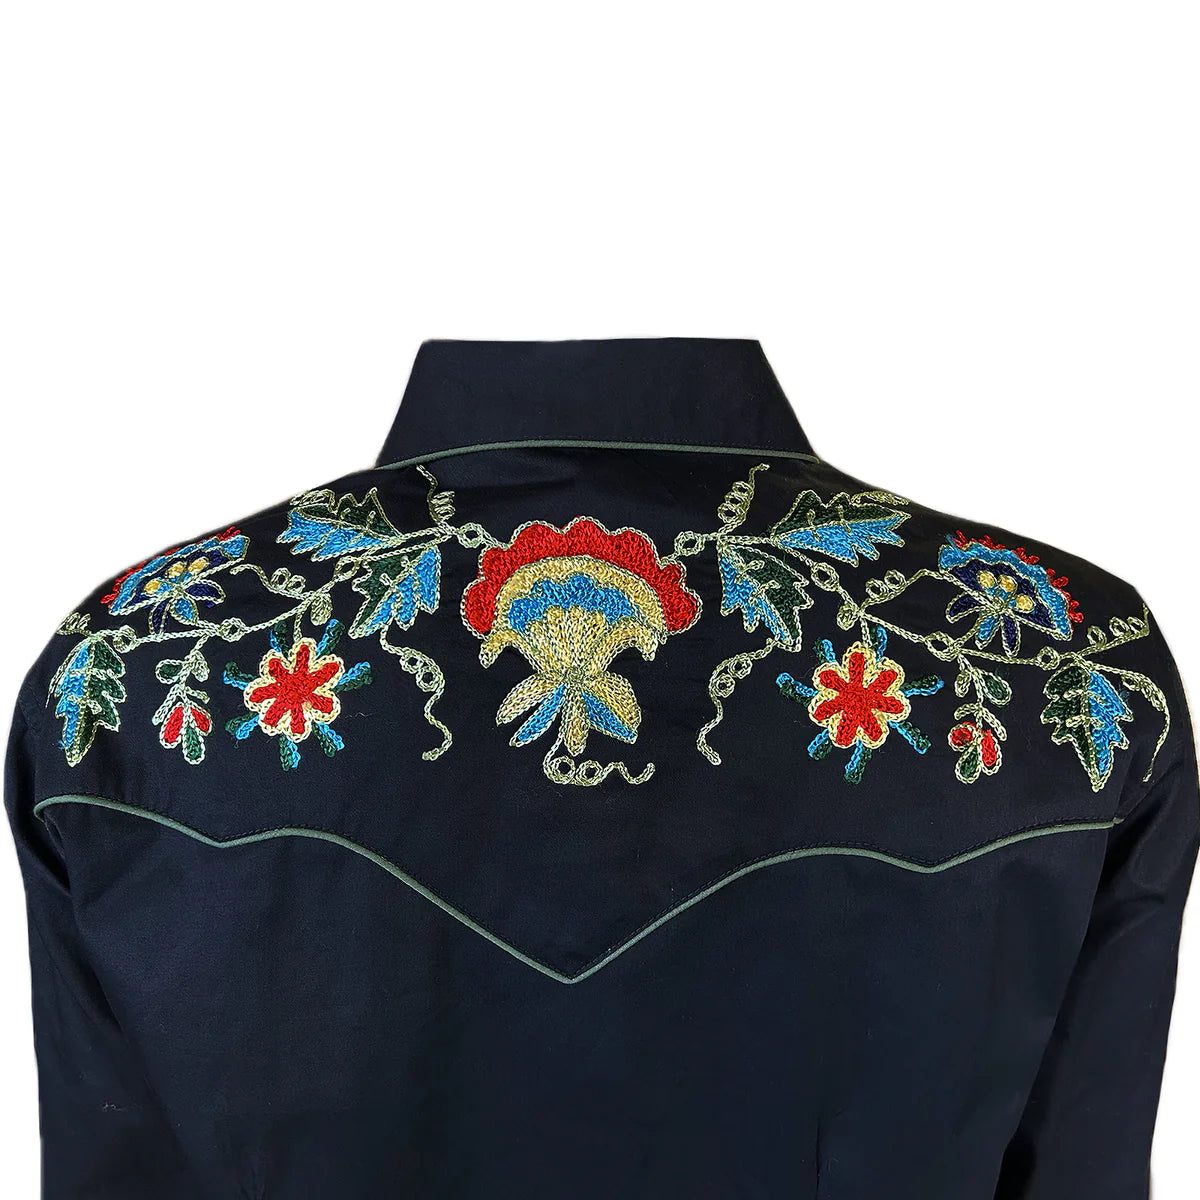 Rockmount Ranch Wear Ladies Western Shirt Floral Embroidery on Black Back